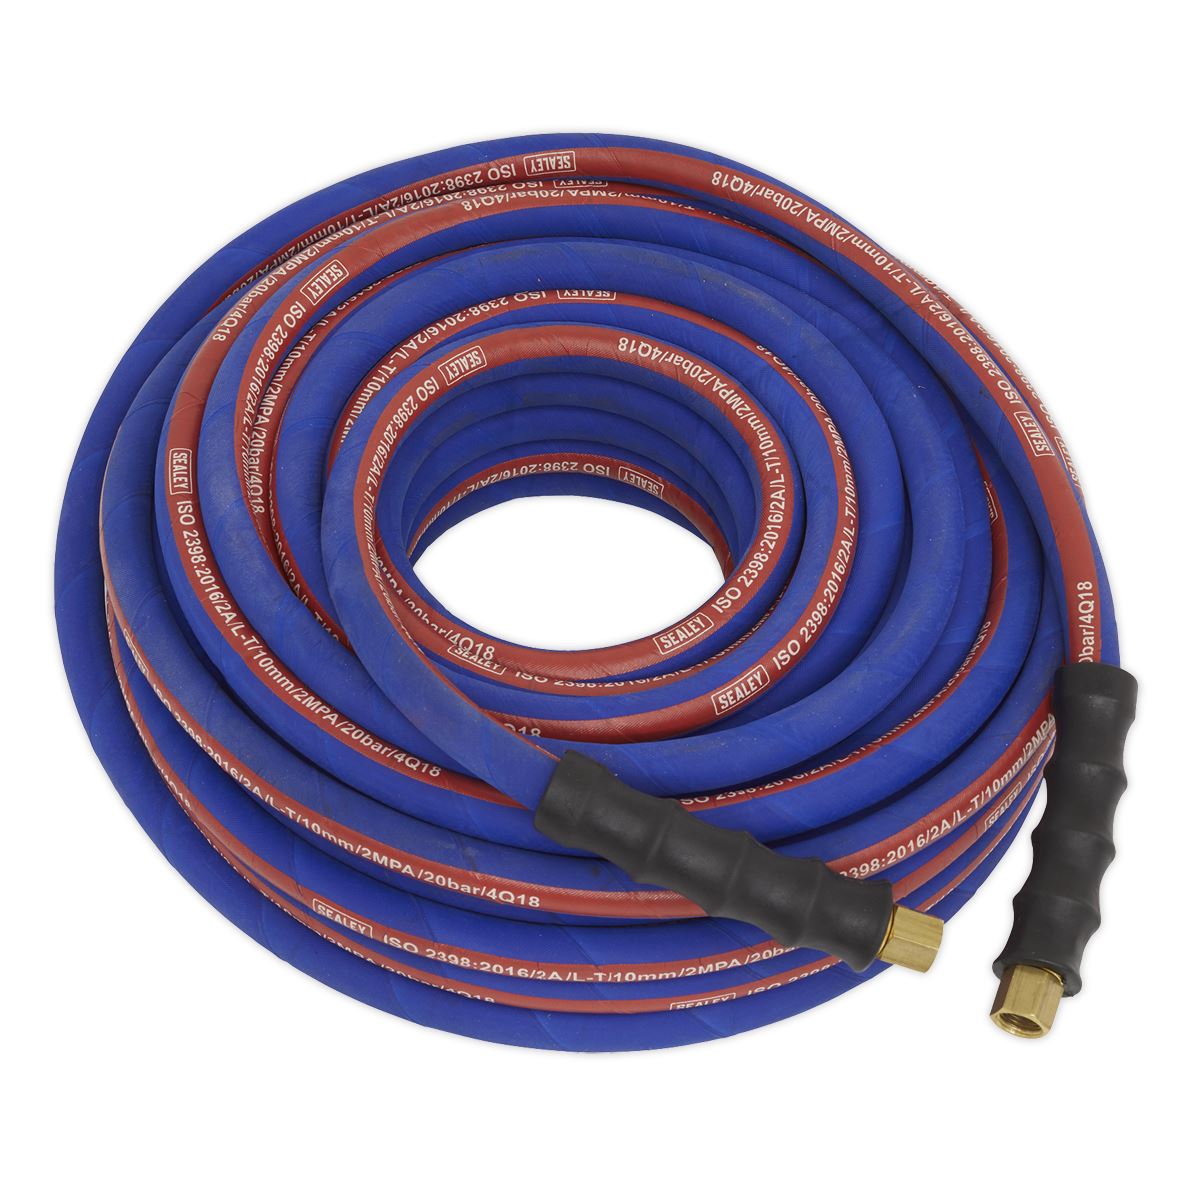 Sealey Air Hose 20m x Ø10mm with 1/4"BSP Unions Extra-Heavy-Duty